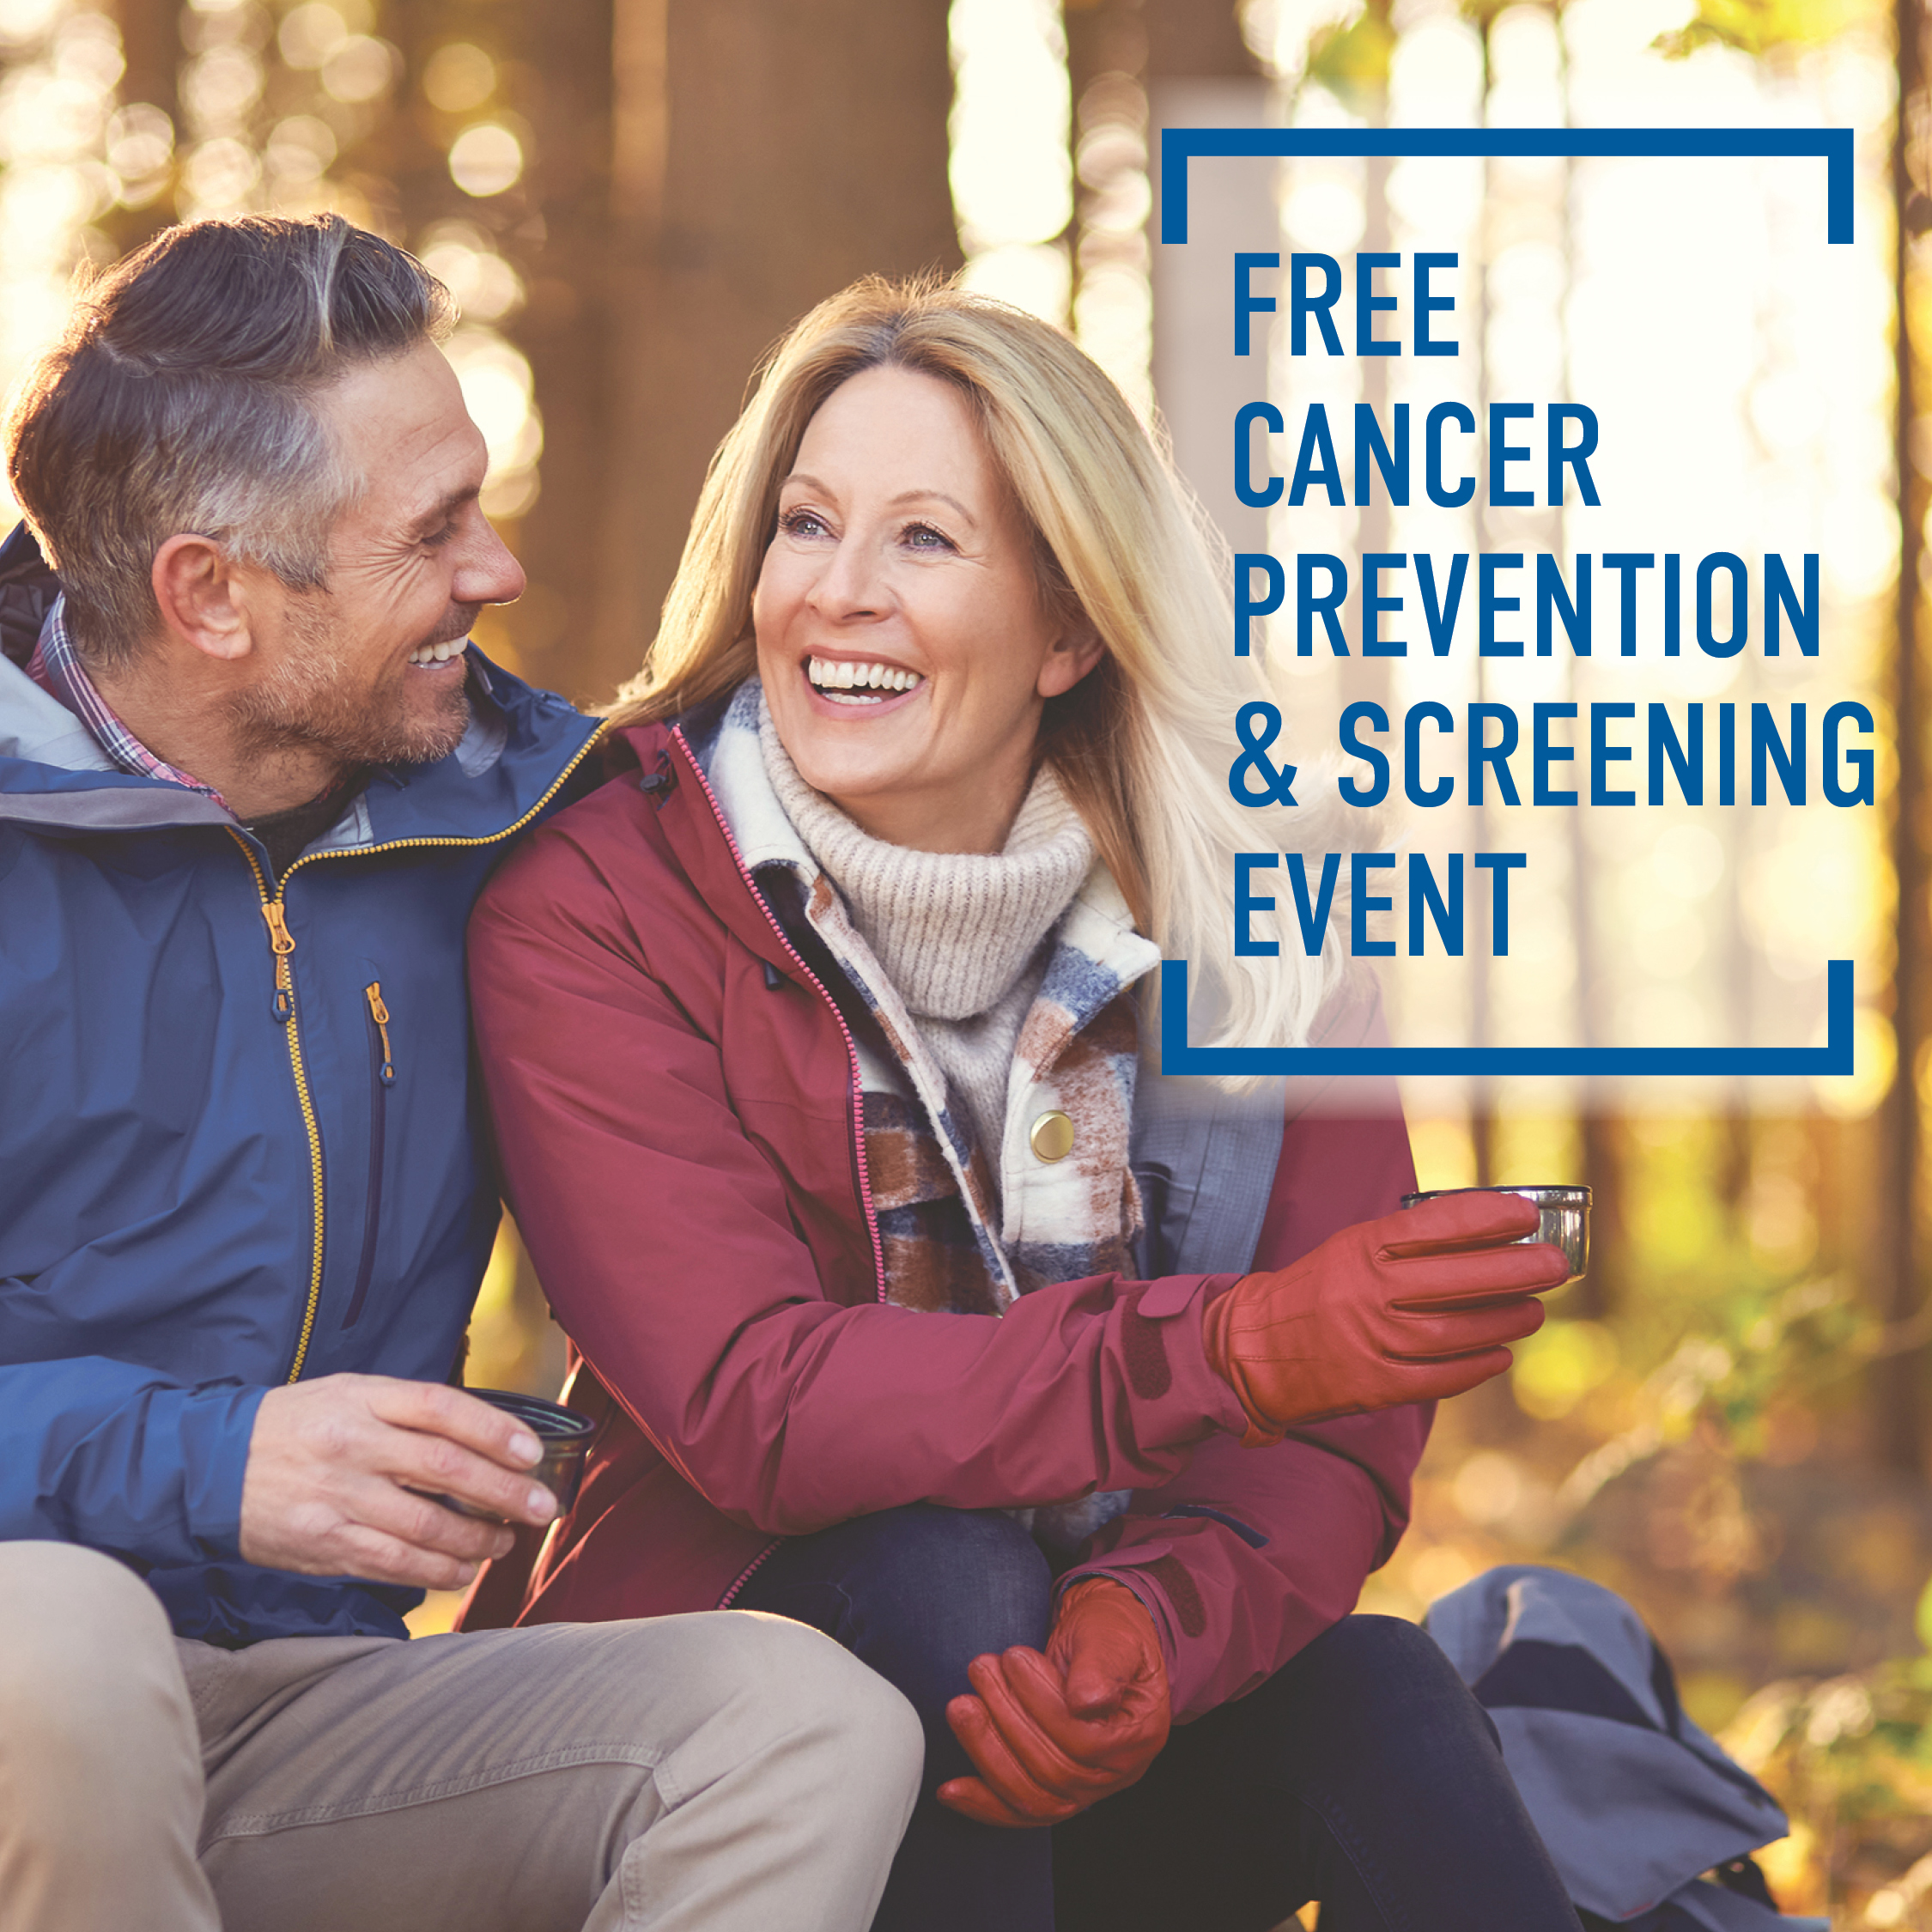 Free Cancer Prevention & Screening Event